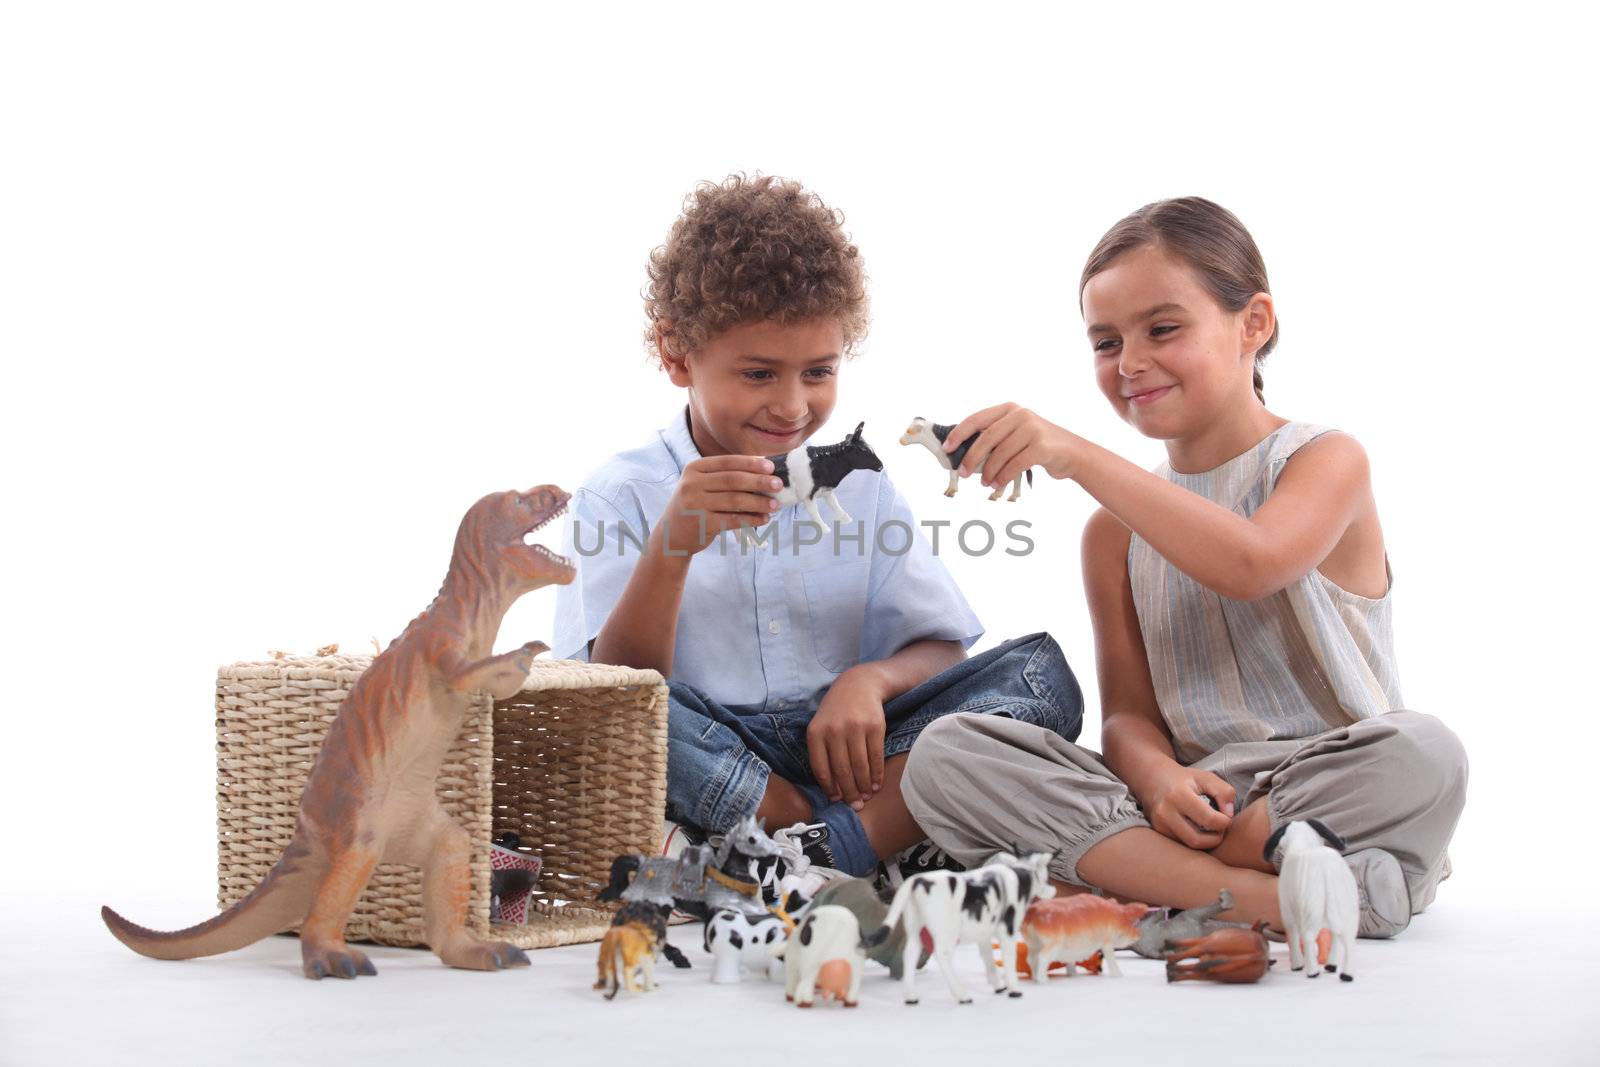 Child playing with toy animals by phovoir